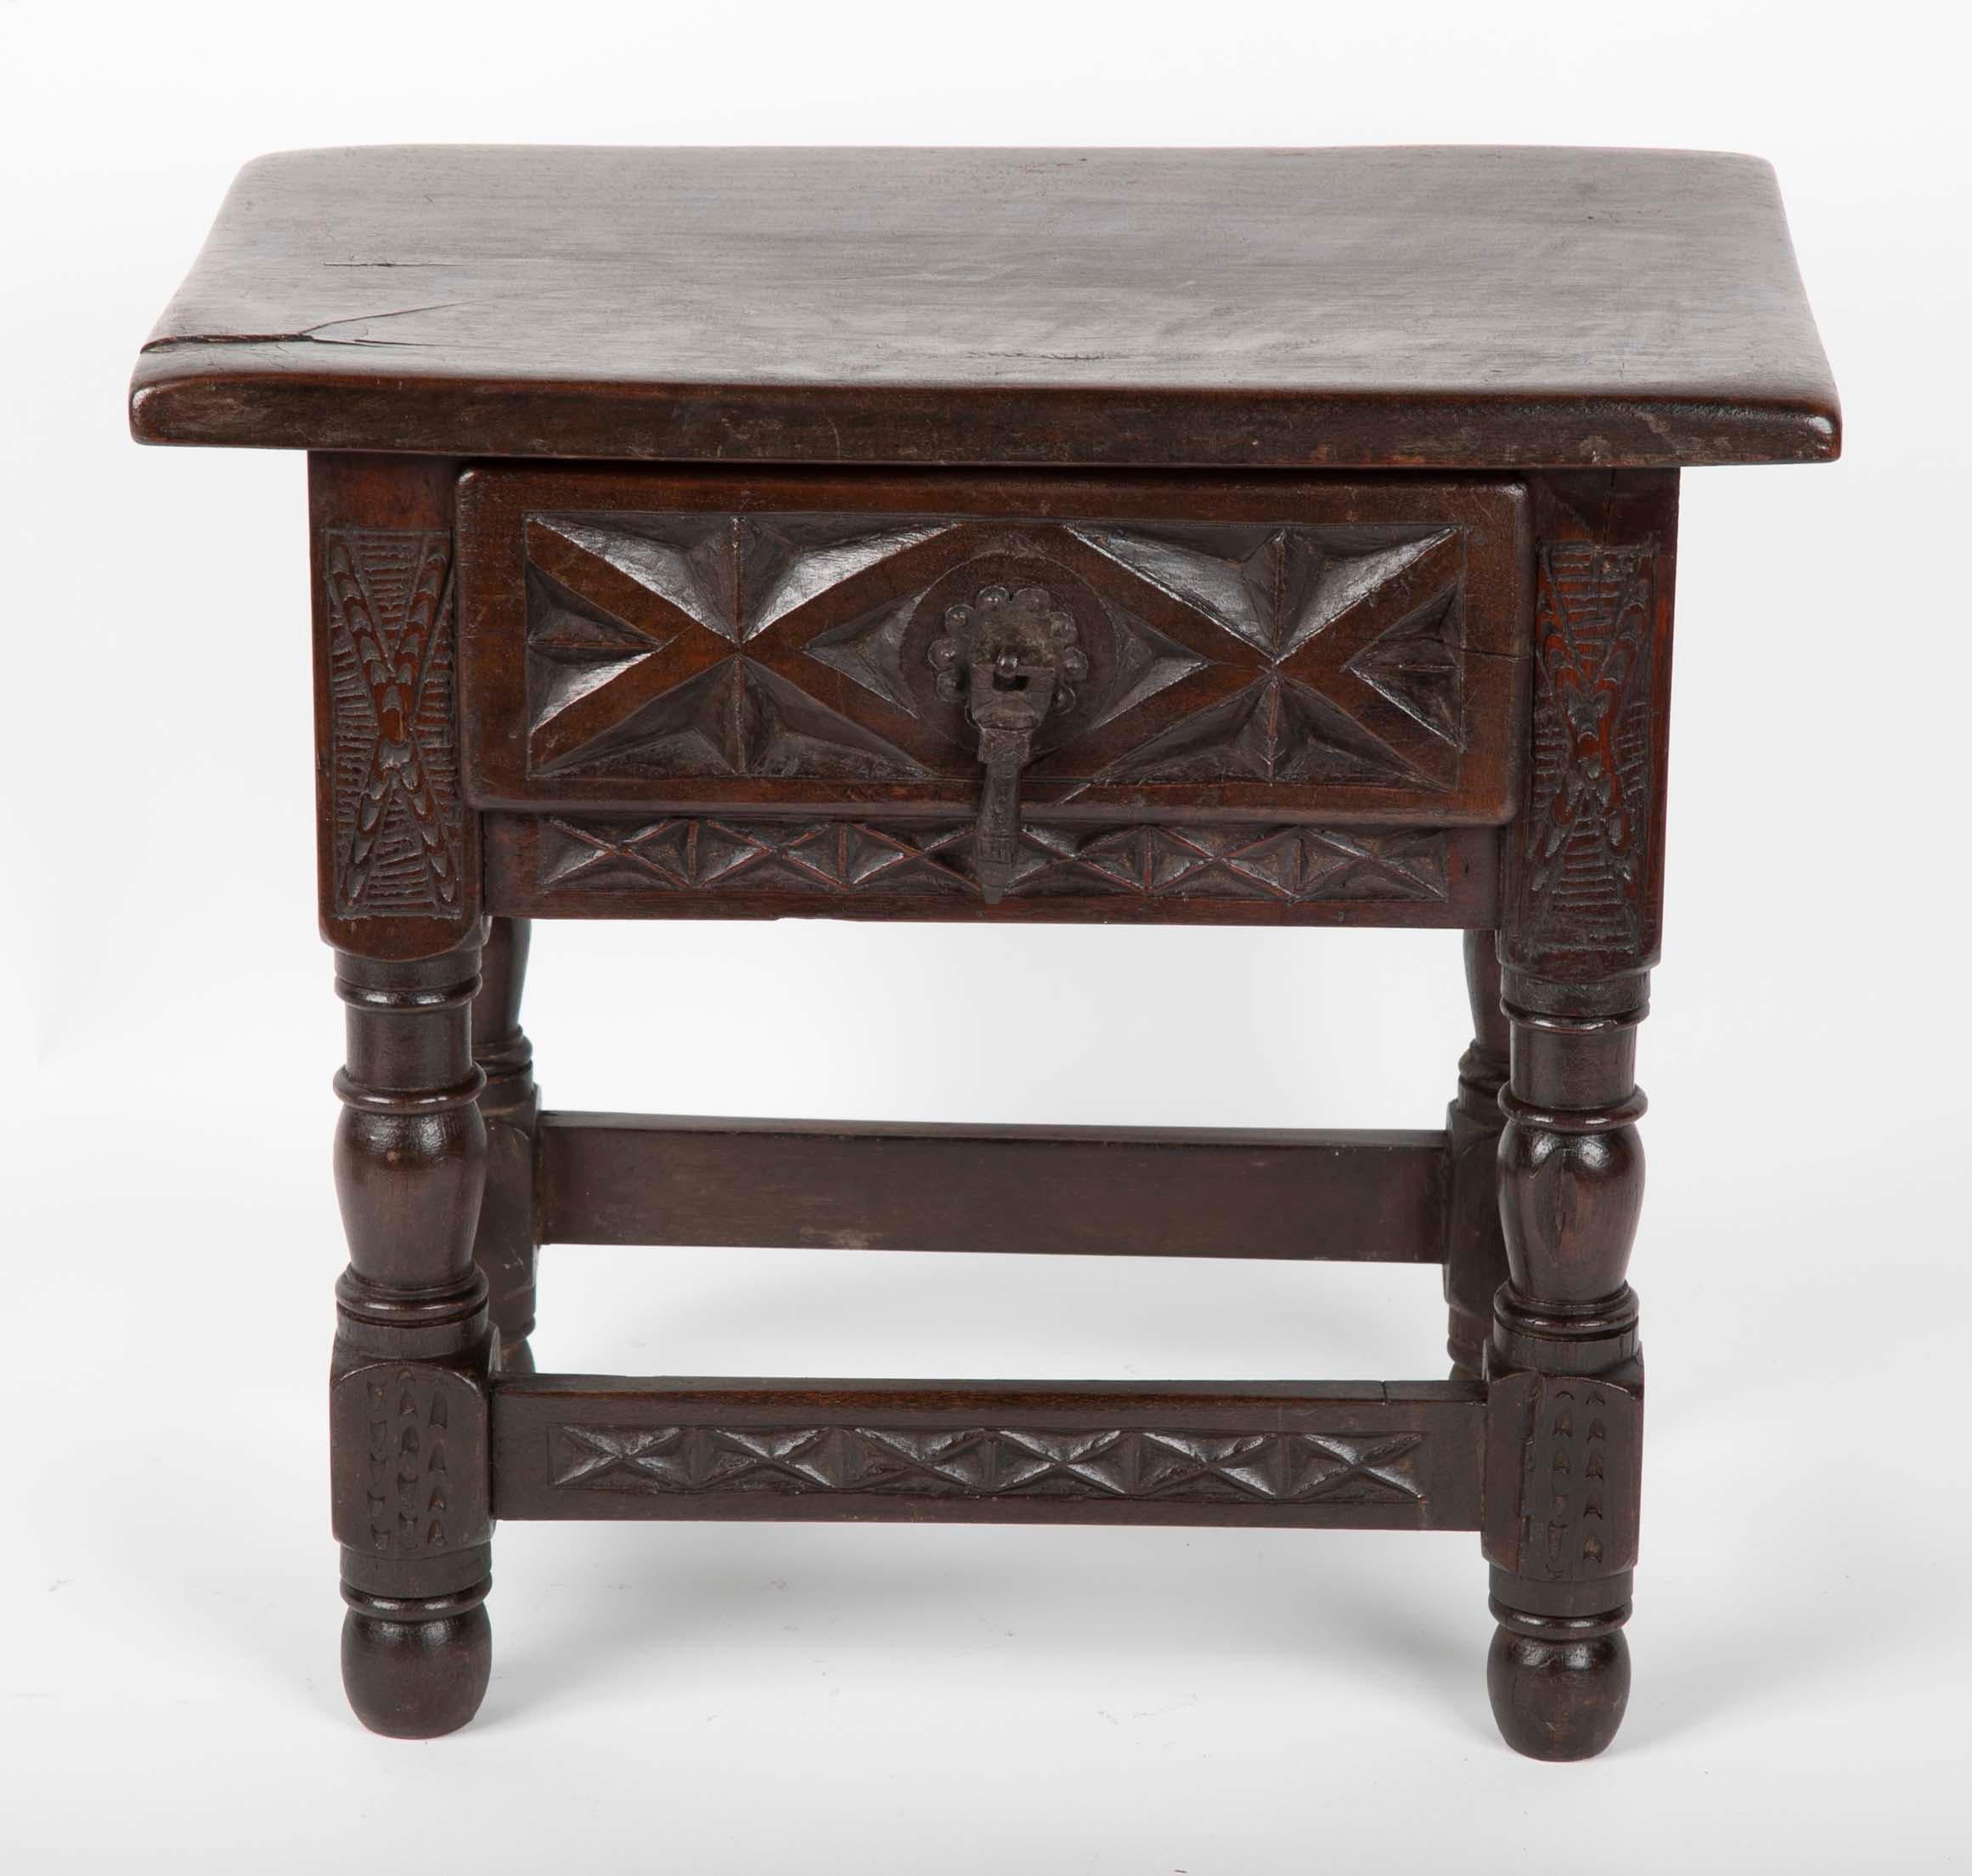 A thoroughly charming Spanish Baroque style table in miniature form. With geometric carved decoration and turned legs, and wrought iron tear-drop drawer pull. Possibly a model made by a cabinet as an example of what he could produce. It makes a